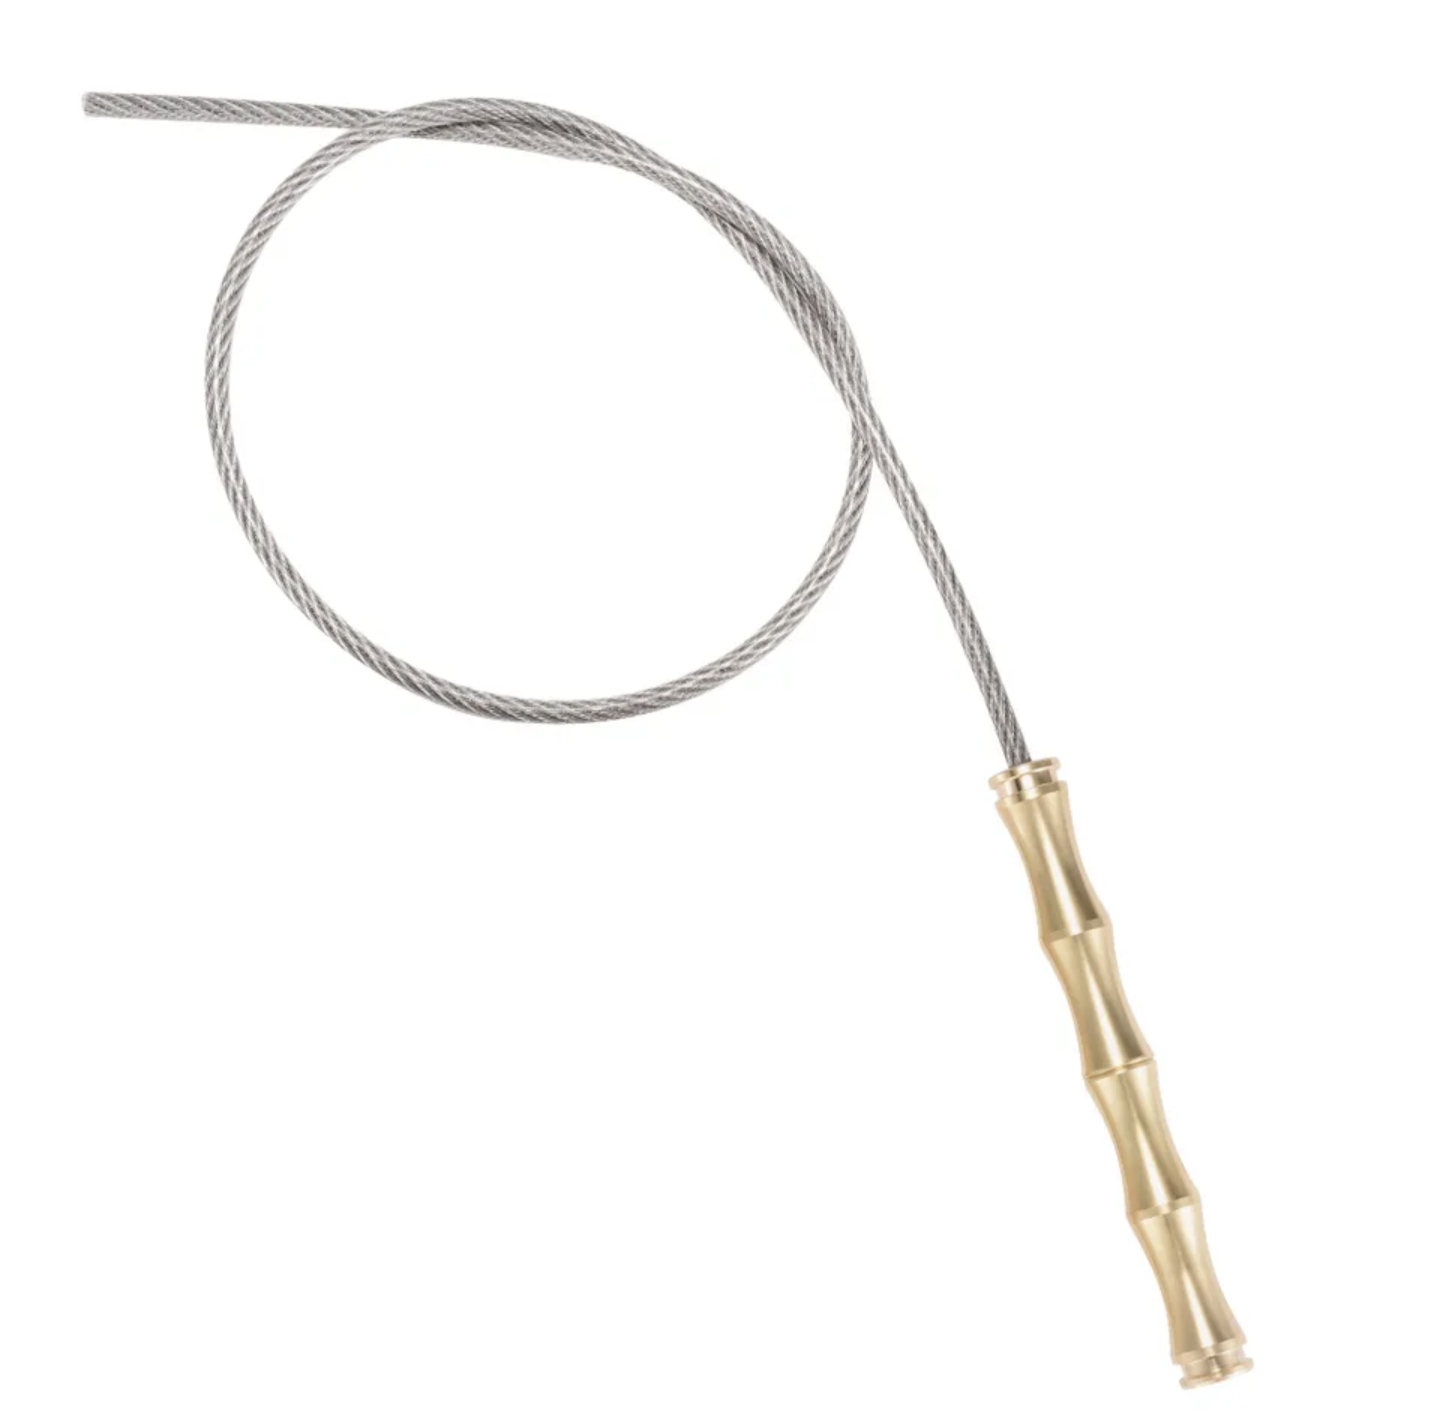 30" BRASS HANDLE STEEL CABLE WHIP